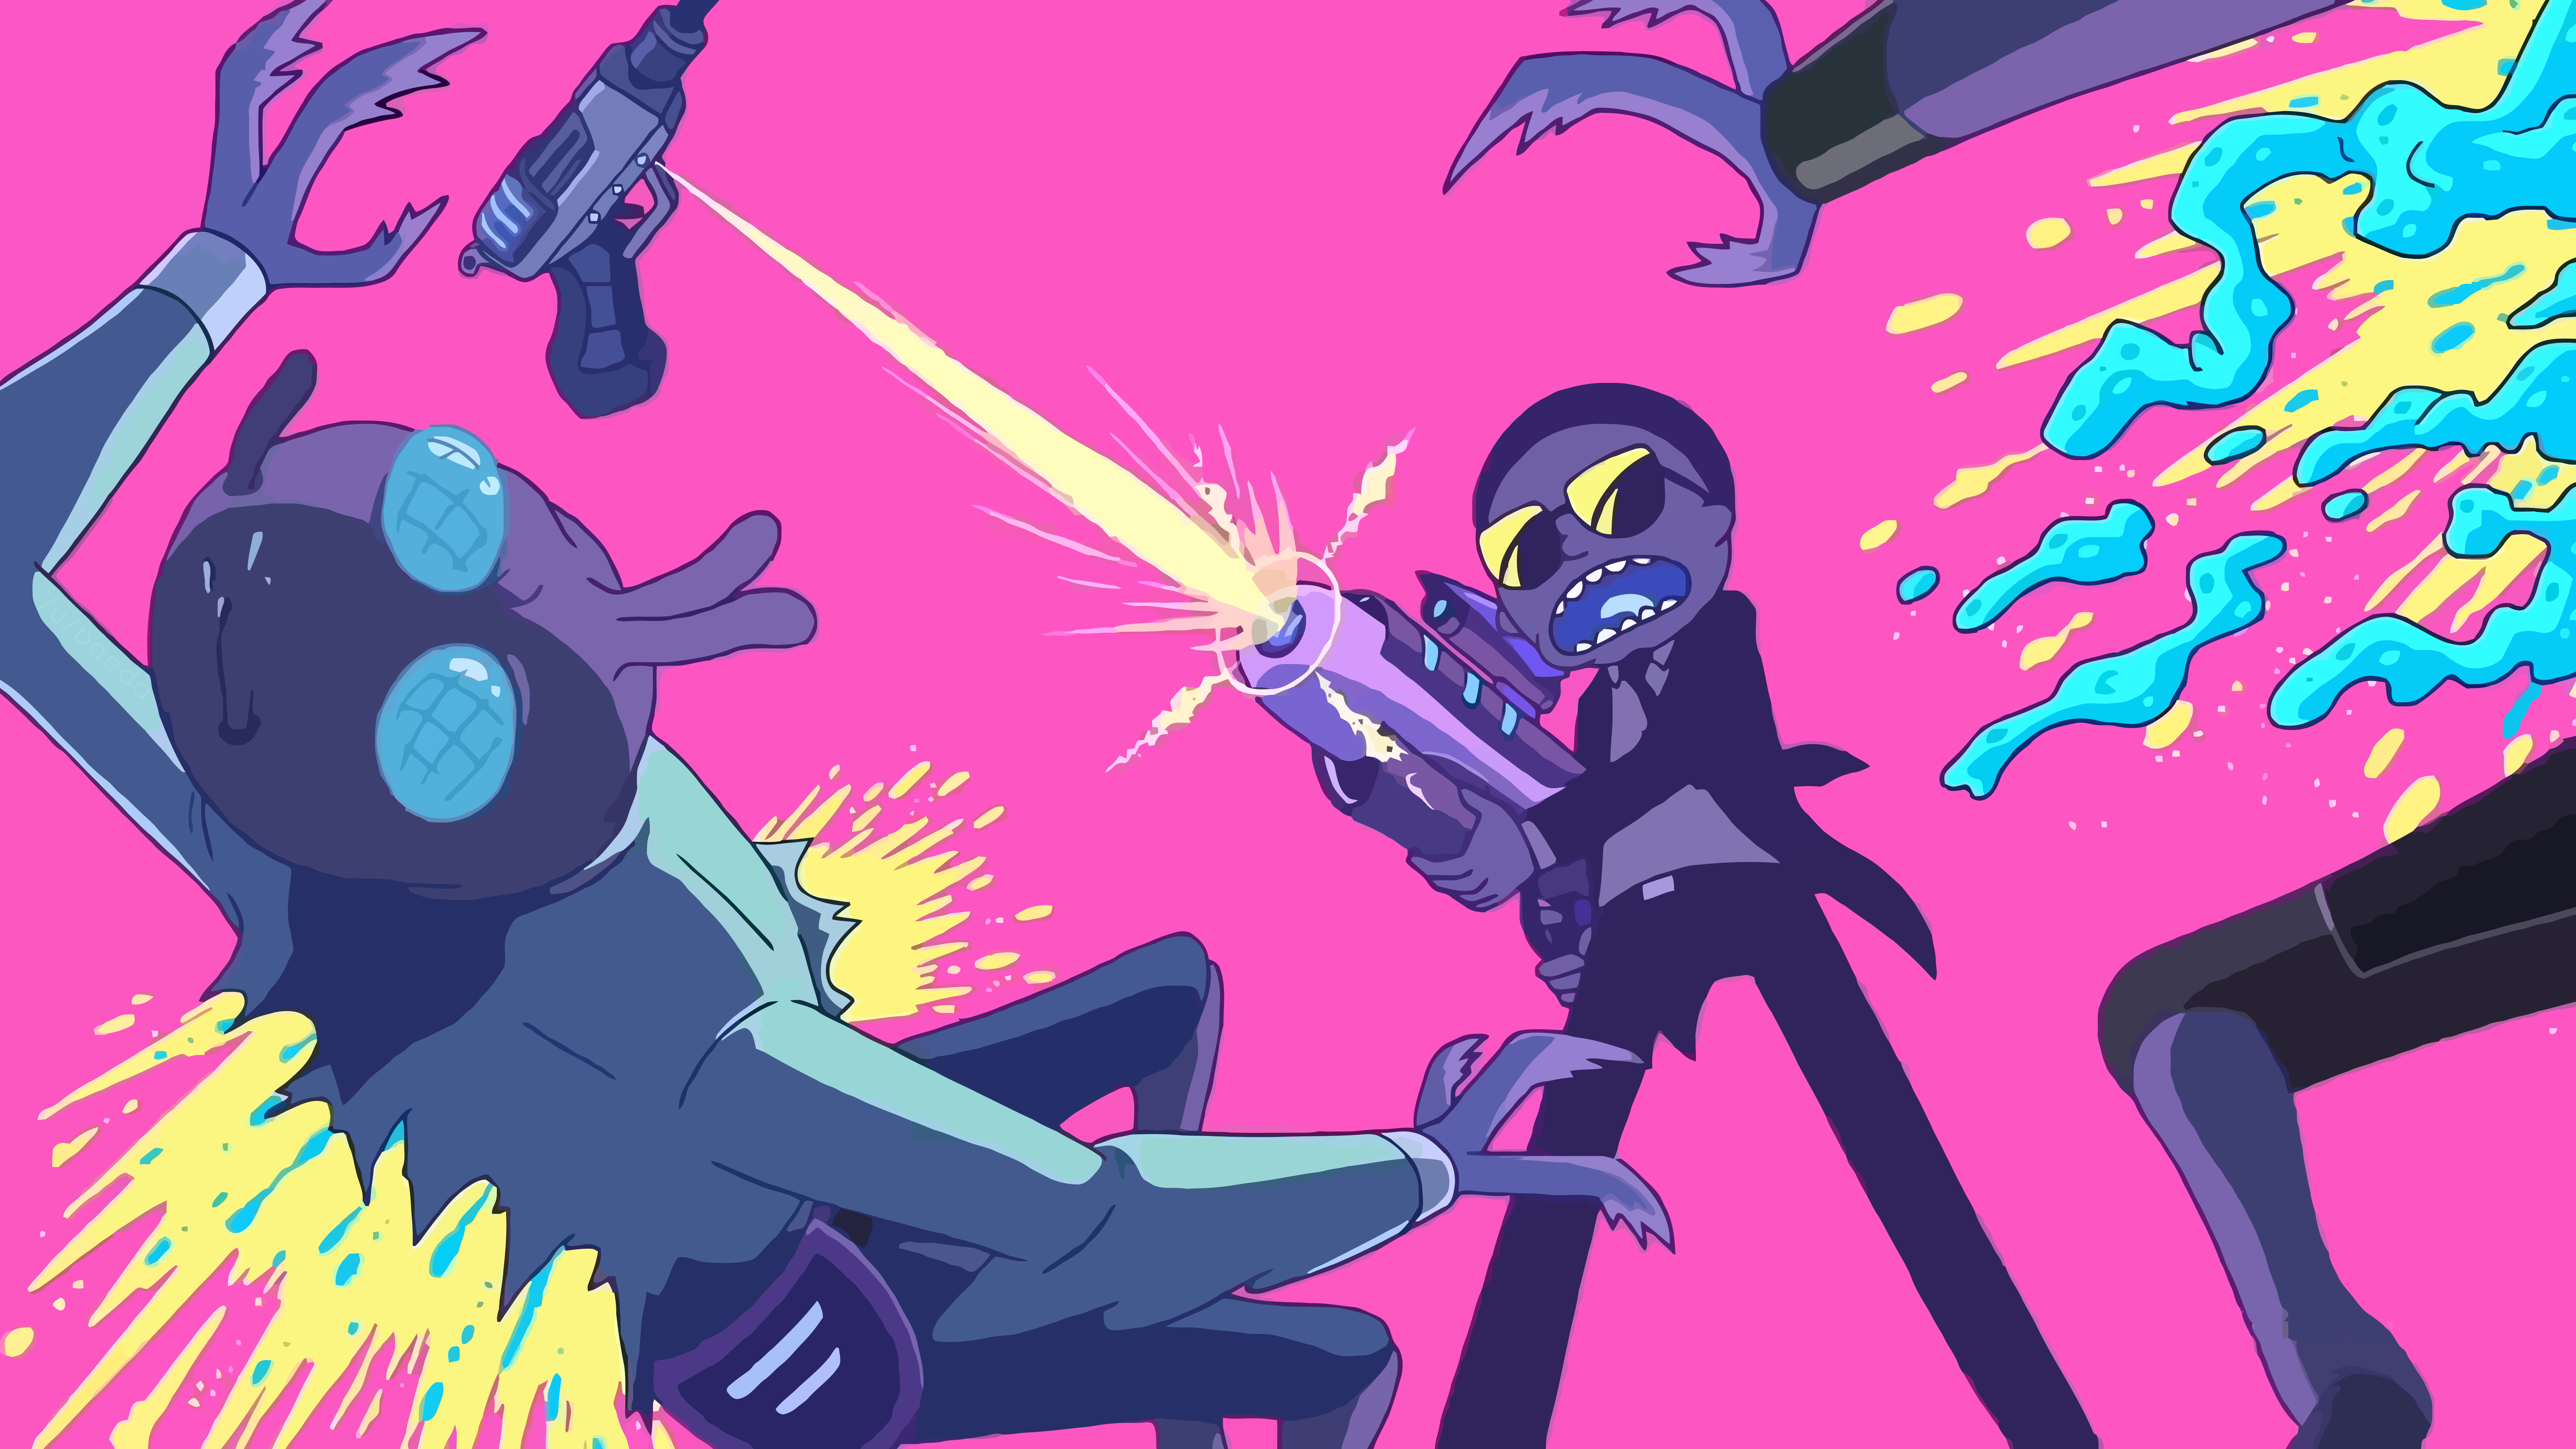 General 8000x4500 Rick and Morty Run the Jewels vector TV series